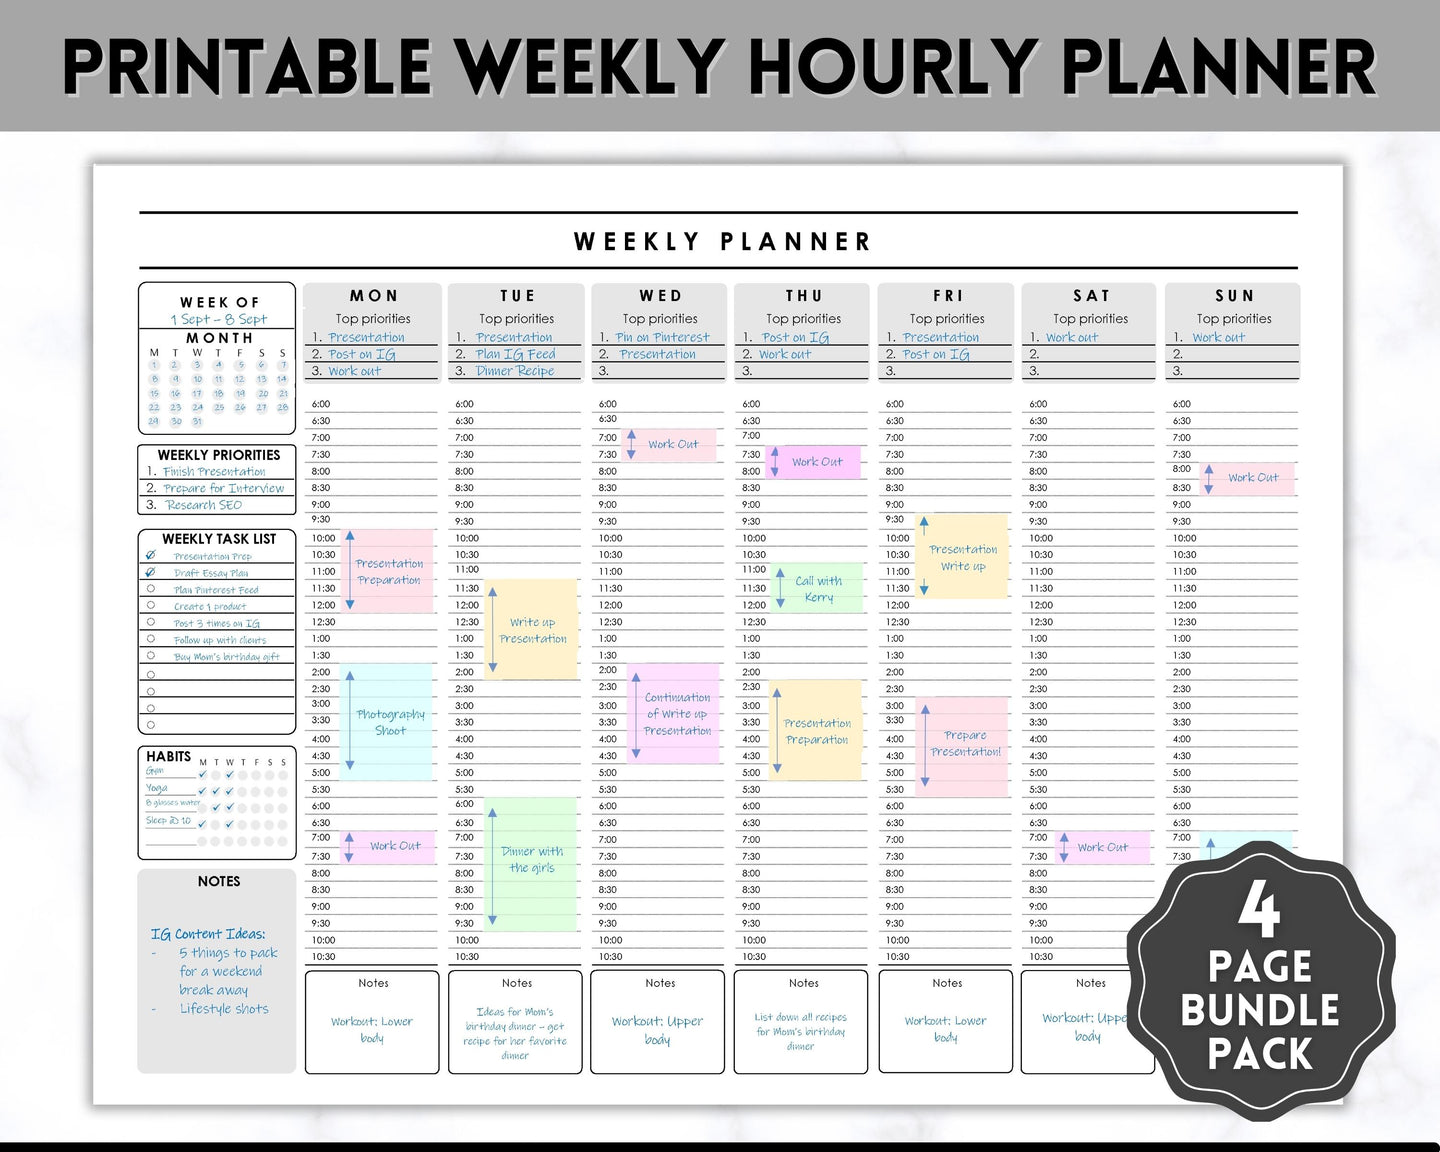 Weekly Planner Printable | Hourly Weekly Schedule, Undated 2023 Organizer & To Do List